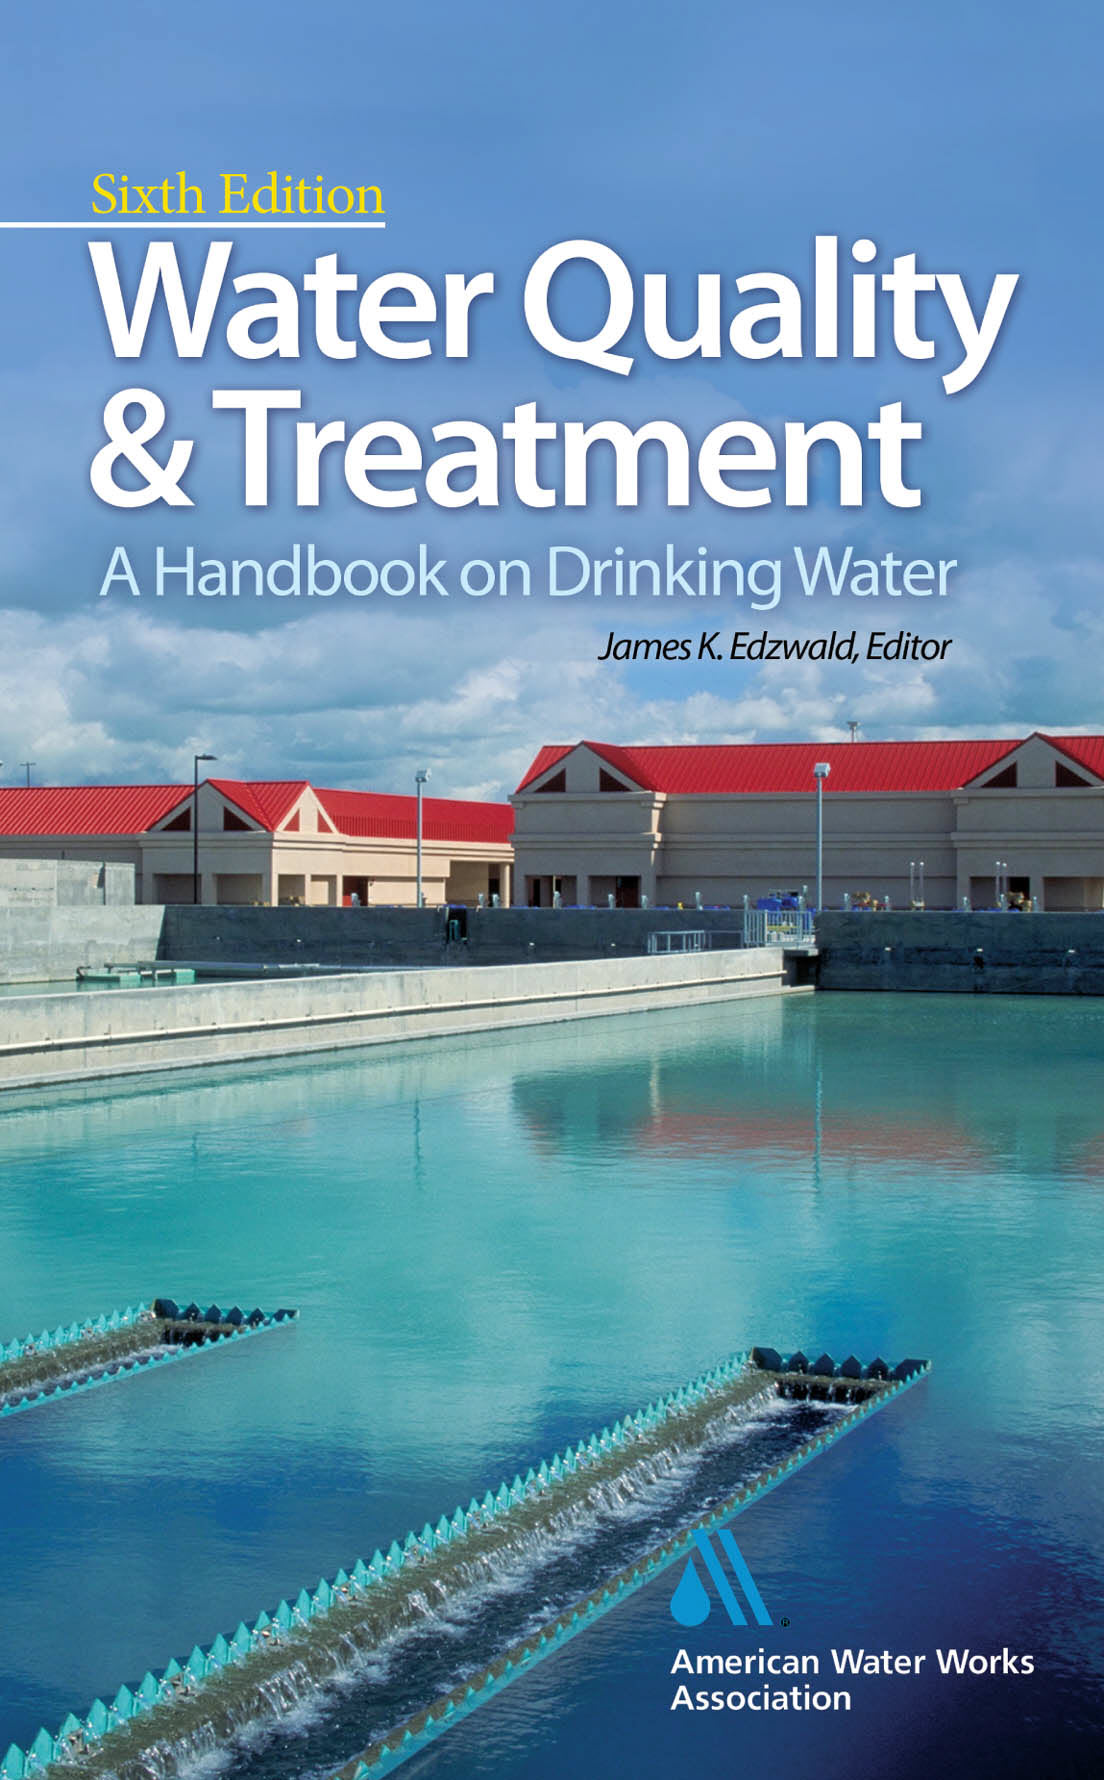 WATER QUALITY & TREATMENT